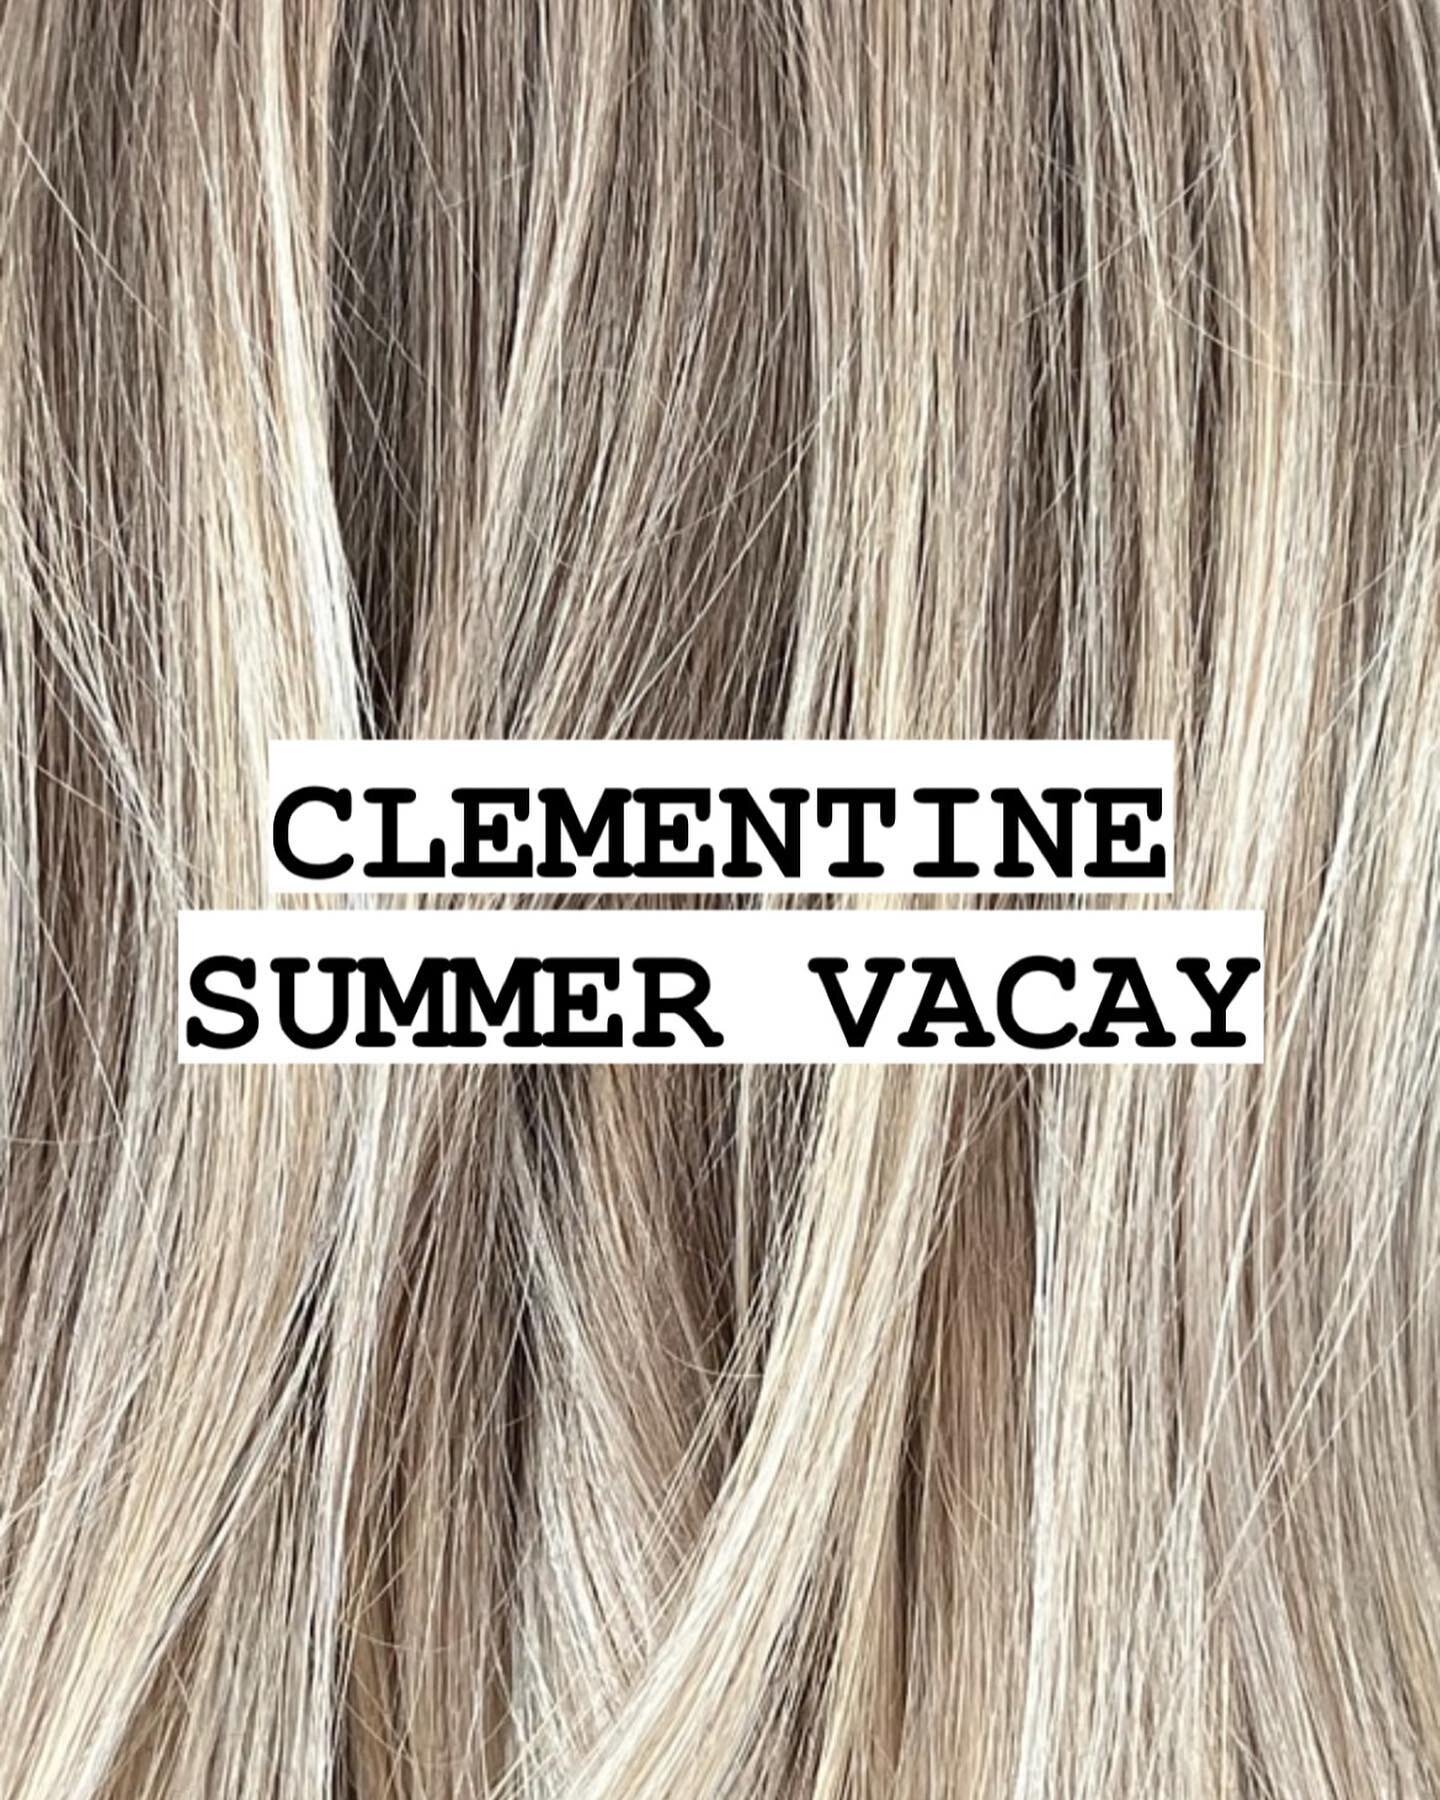 Clementine will be closed from JULY 2-10 to give our team some well deserved R&amp;R! We will be back on July 11th.
We will be periodically checking emails during this week. For any inquiries, please email clementinehairstudio@gmail.com. 
As always, 